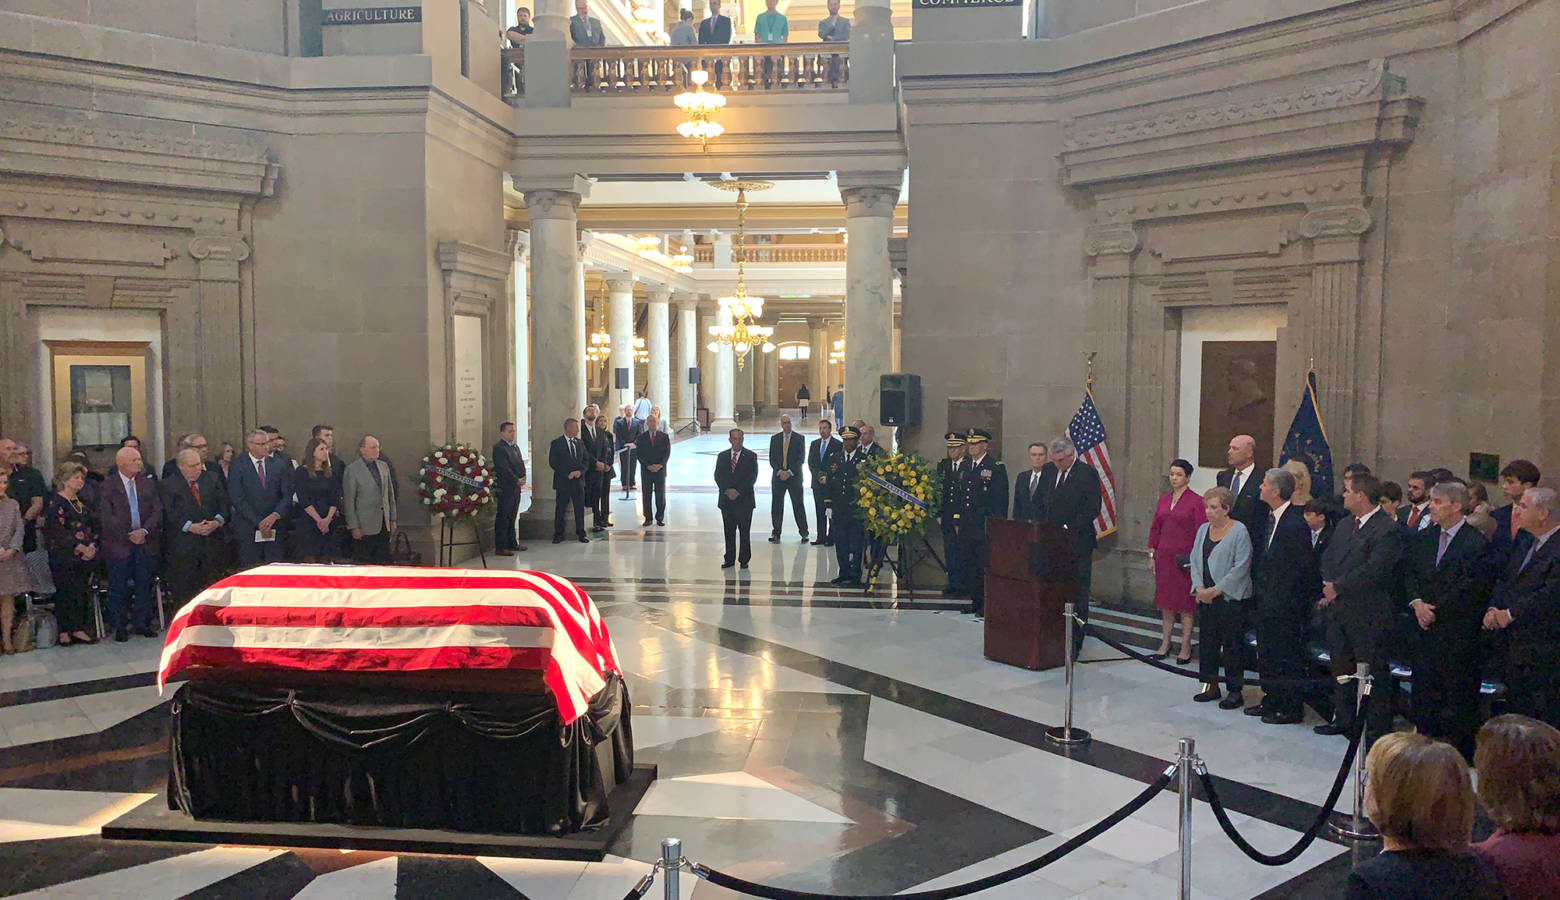 Former Sen. Richard Lugar (R-Ind.) lies in state at the Indiana Statehouse. (Brandon Smith/IPB News)